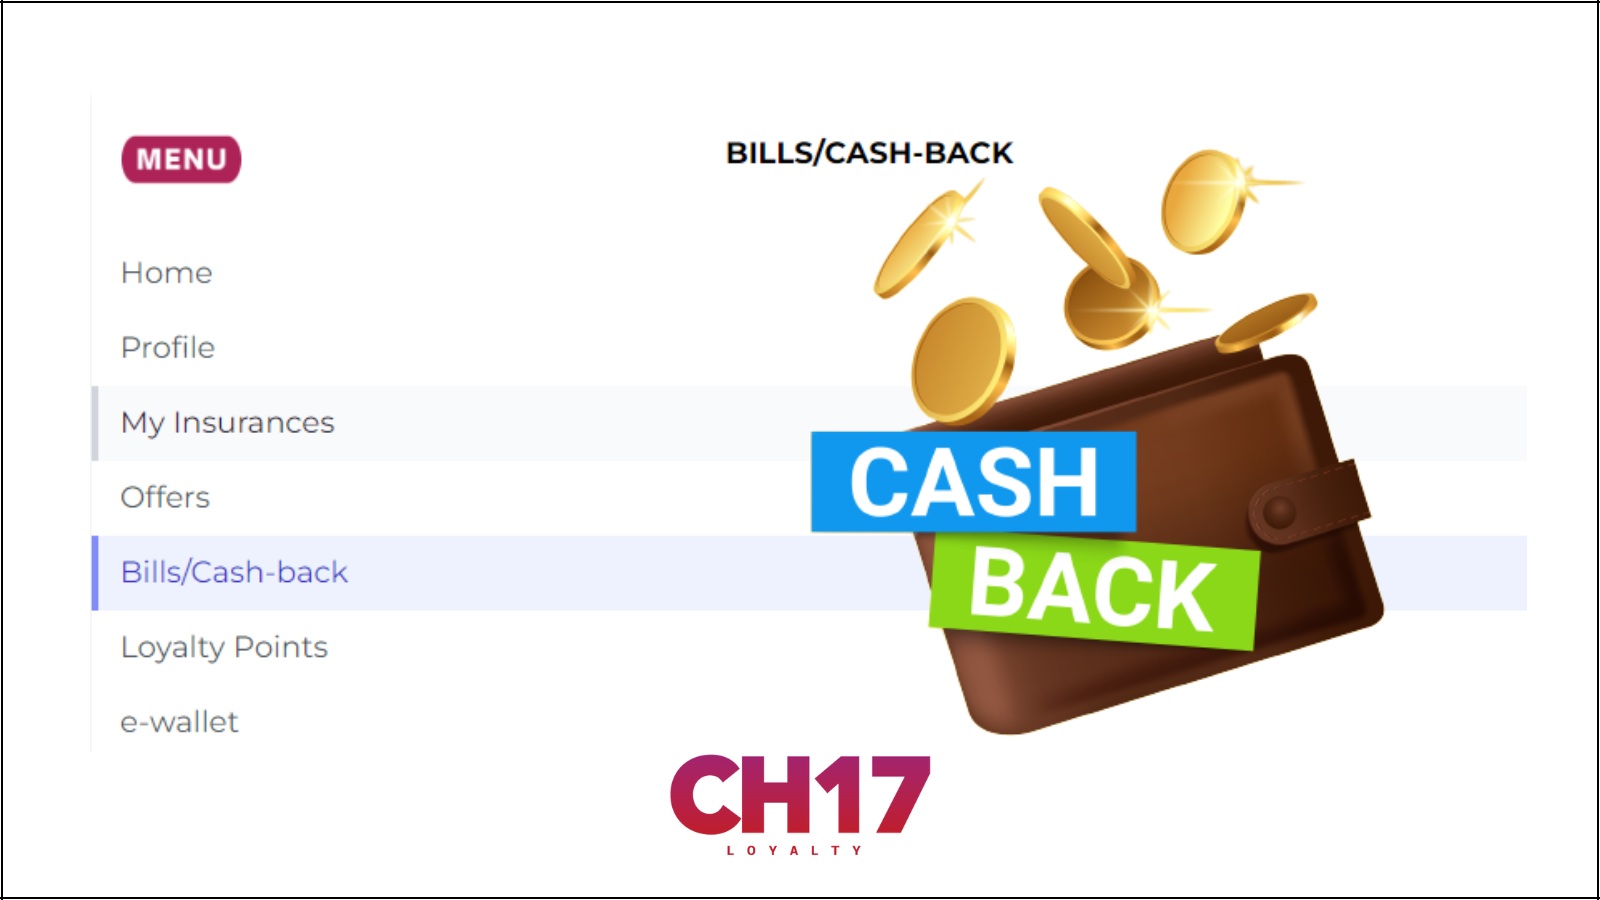 CH17 Loyalty Expands Cash Back Offers to Selected Non-Partner Merchants.